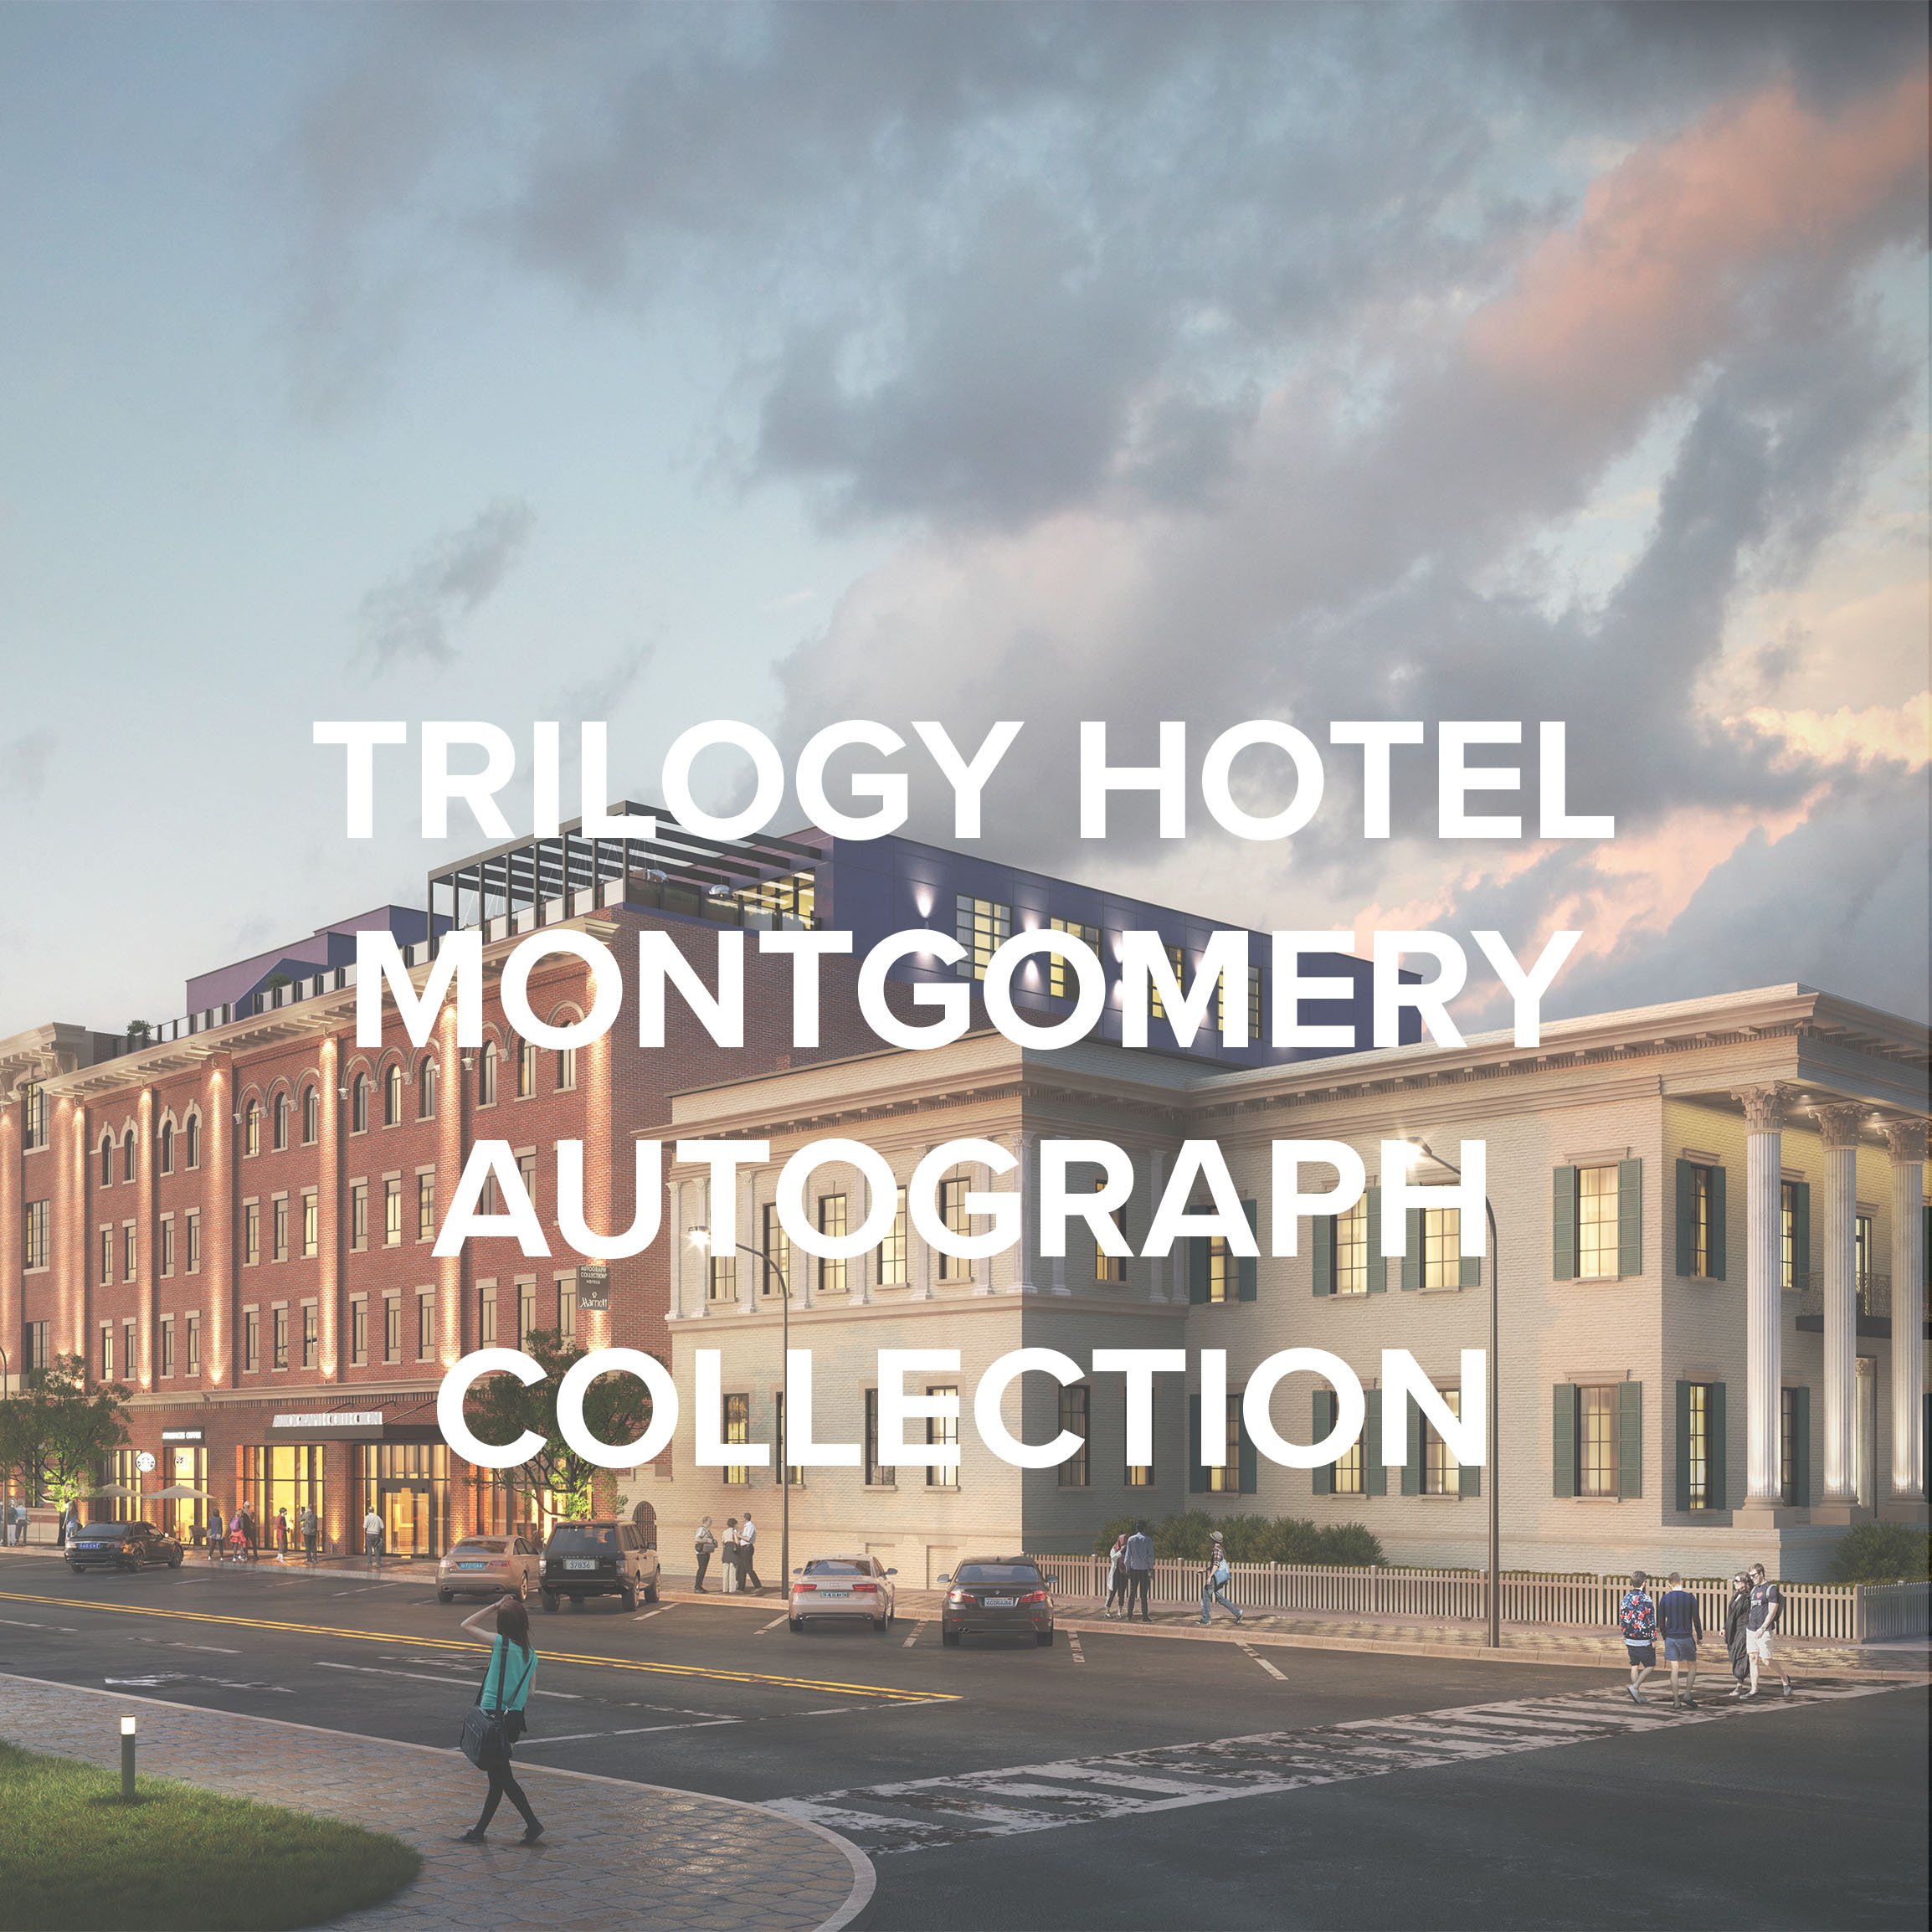 TRILOGY HOTEL MONTGOMERY AUTOGRAPH COLLECTION